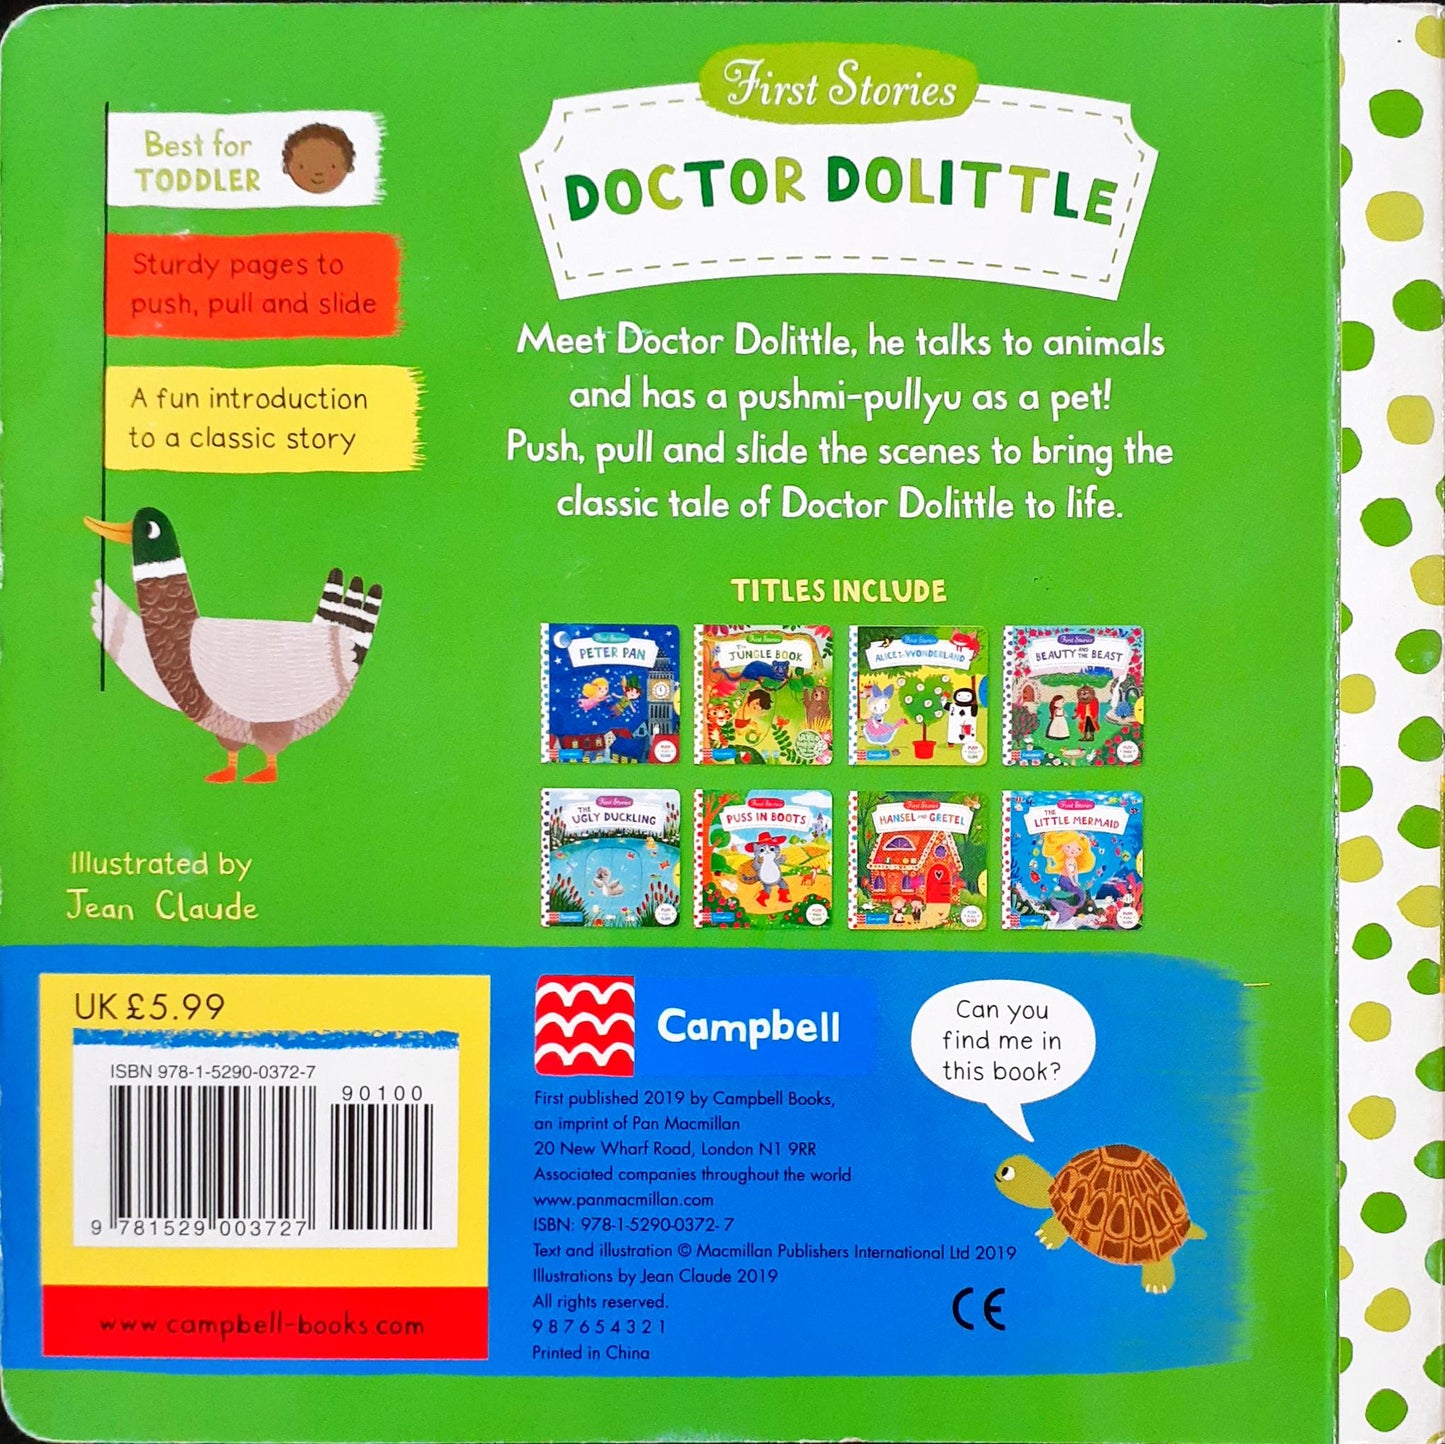 Doctor Dolittle - Campbell First Stories Board Book. PUSH PULL & SLIDE